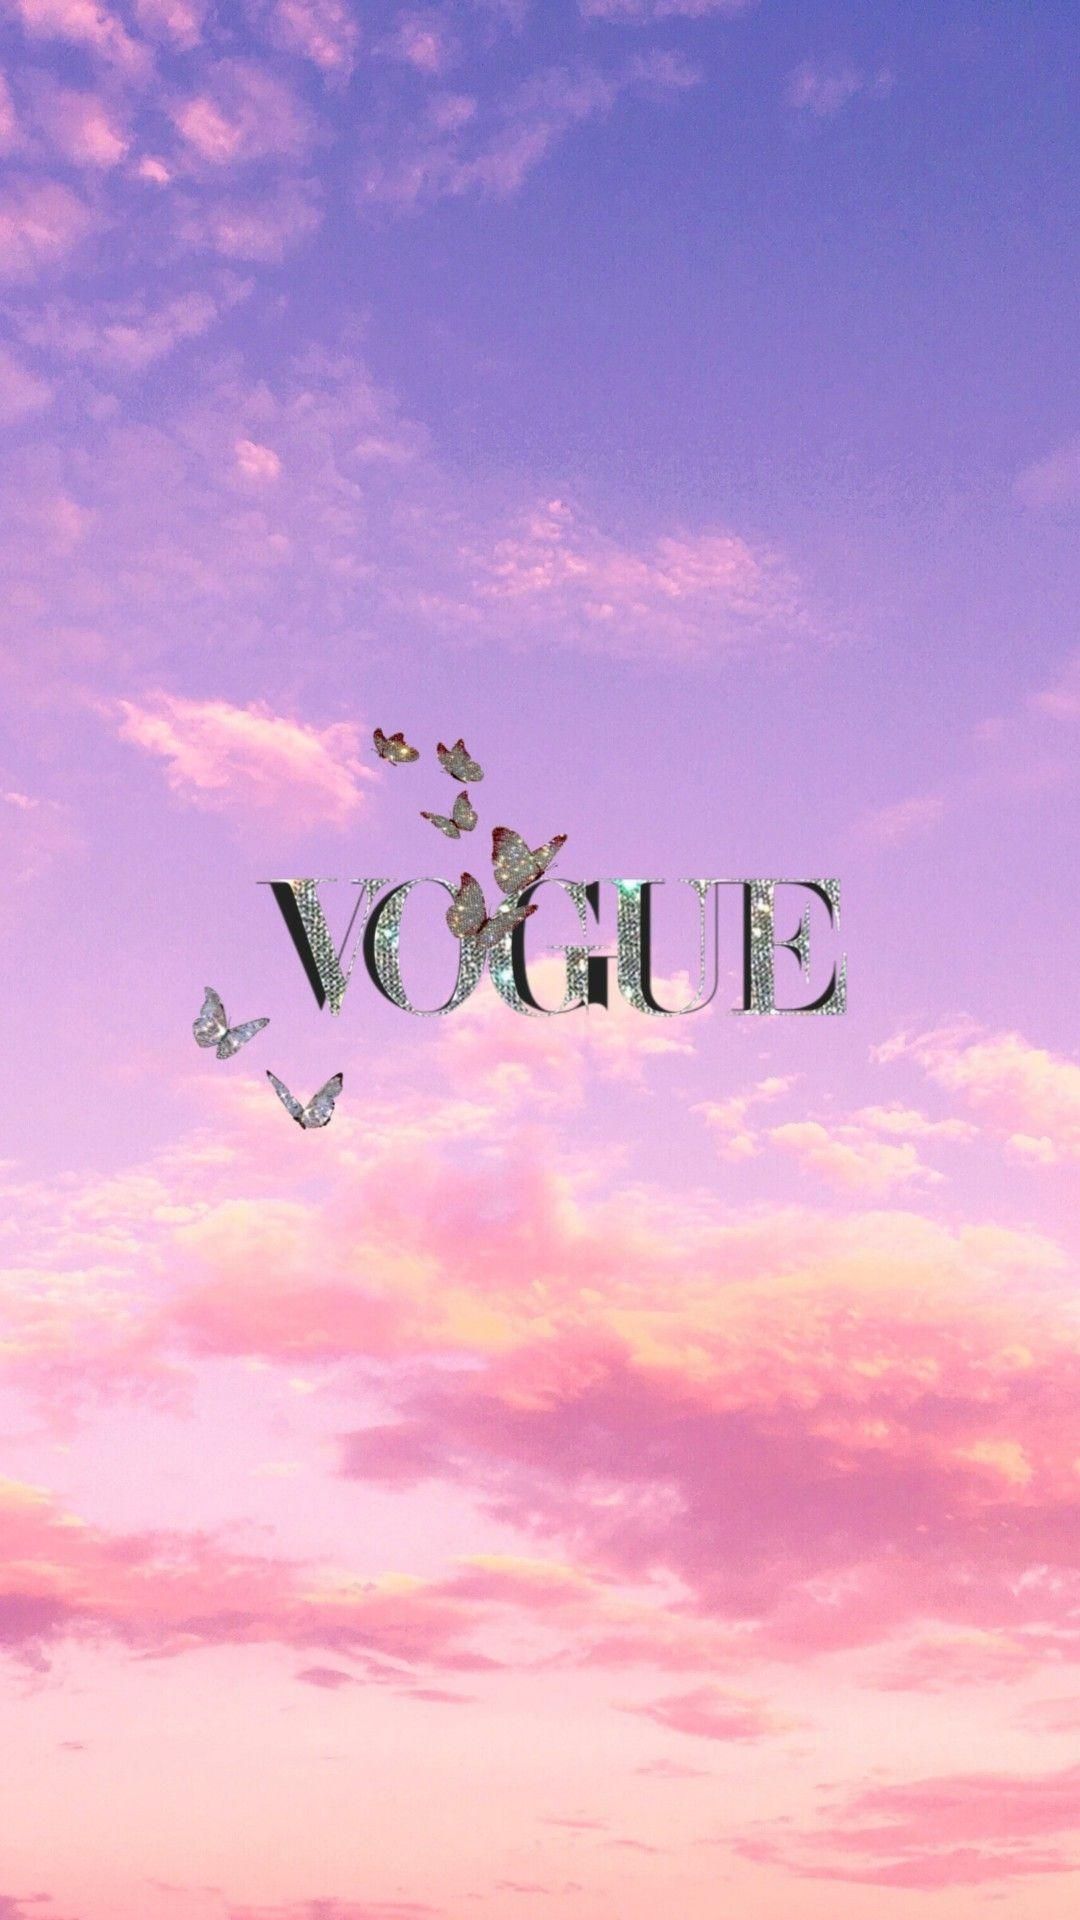 Pink Brand Aesthetic * Pink wallpaper * Pink Gucci * Pink Vogue * Follow me for more.. iPhone wallpaper, Pretty wallpaper tumblr, Wallpaper